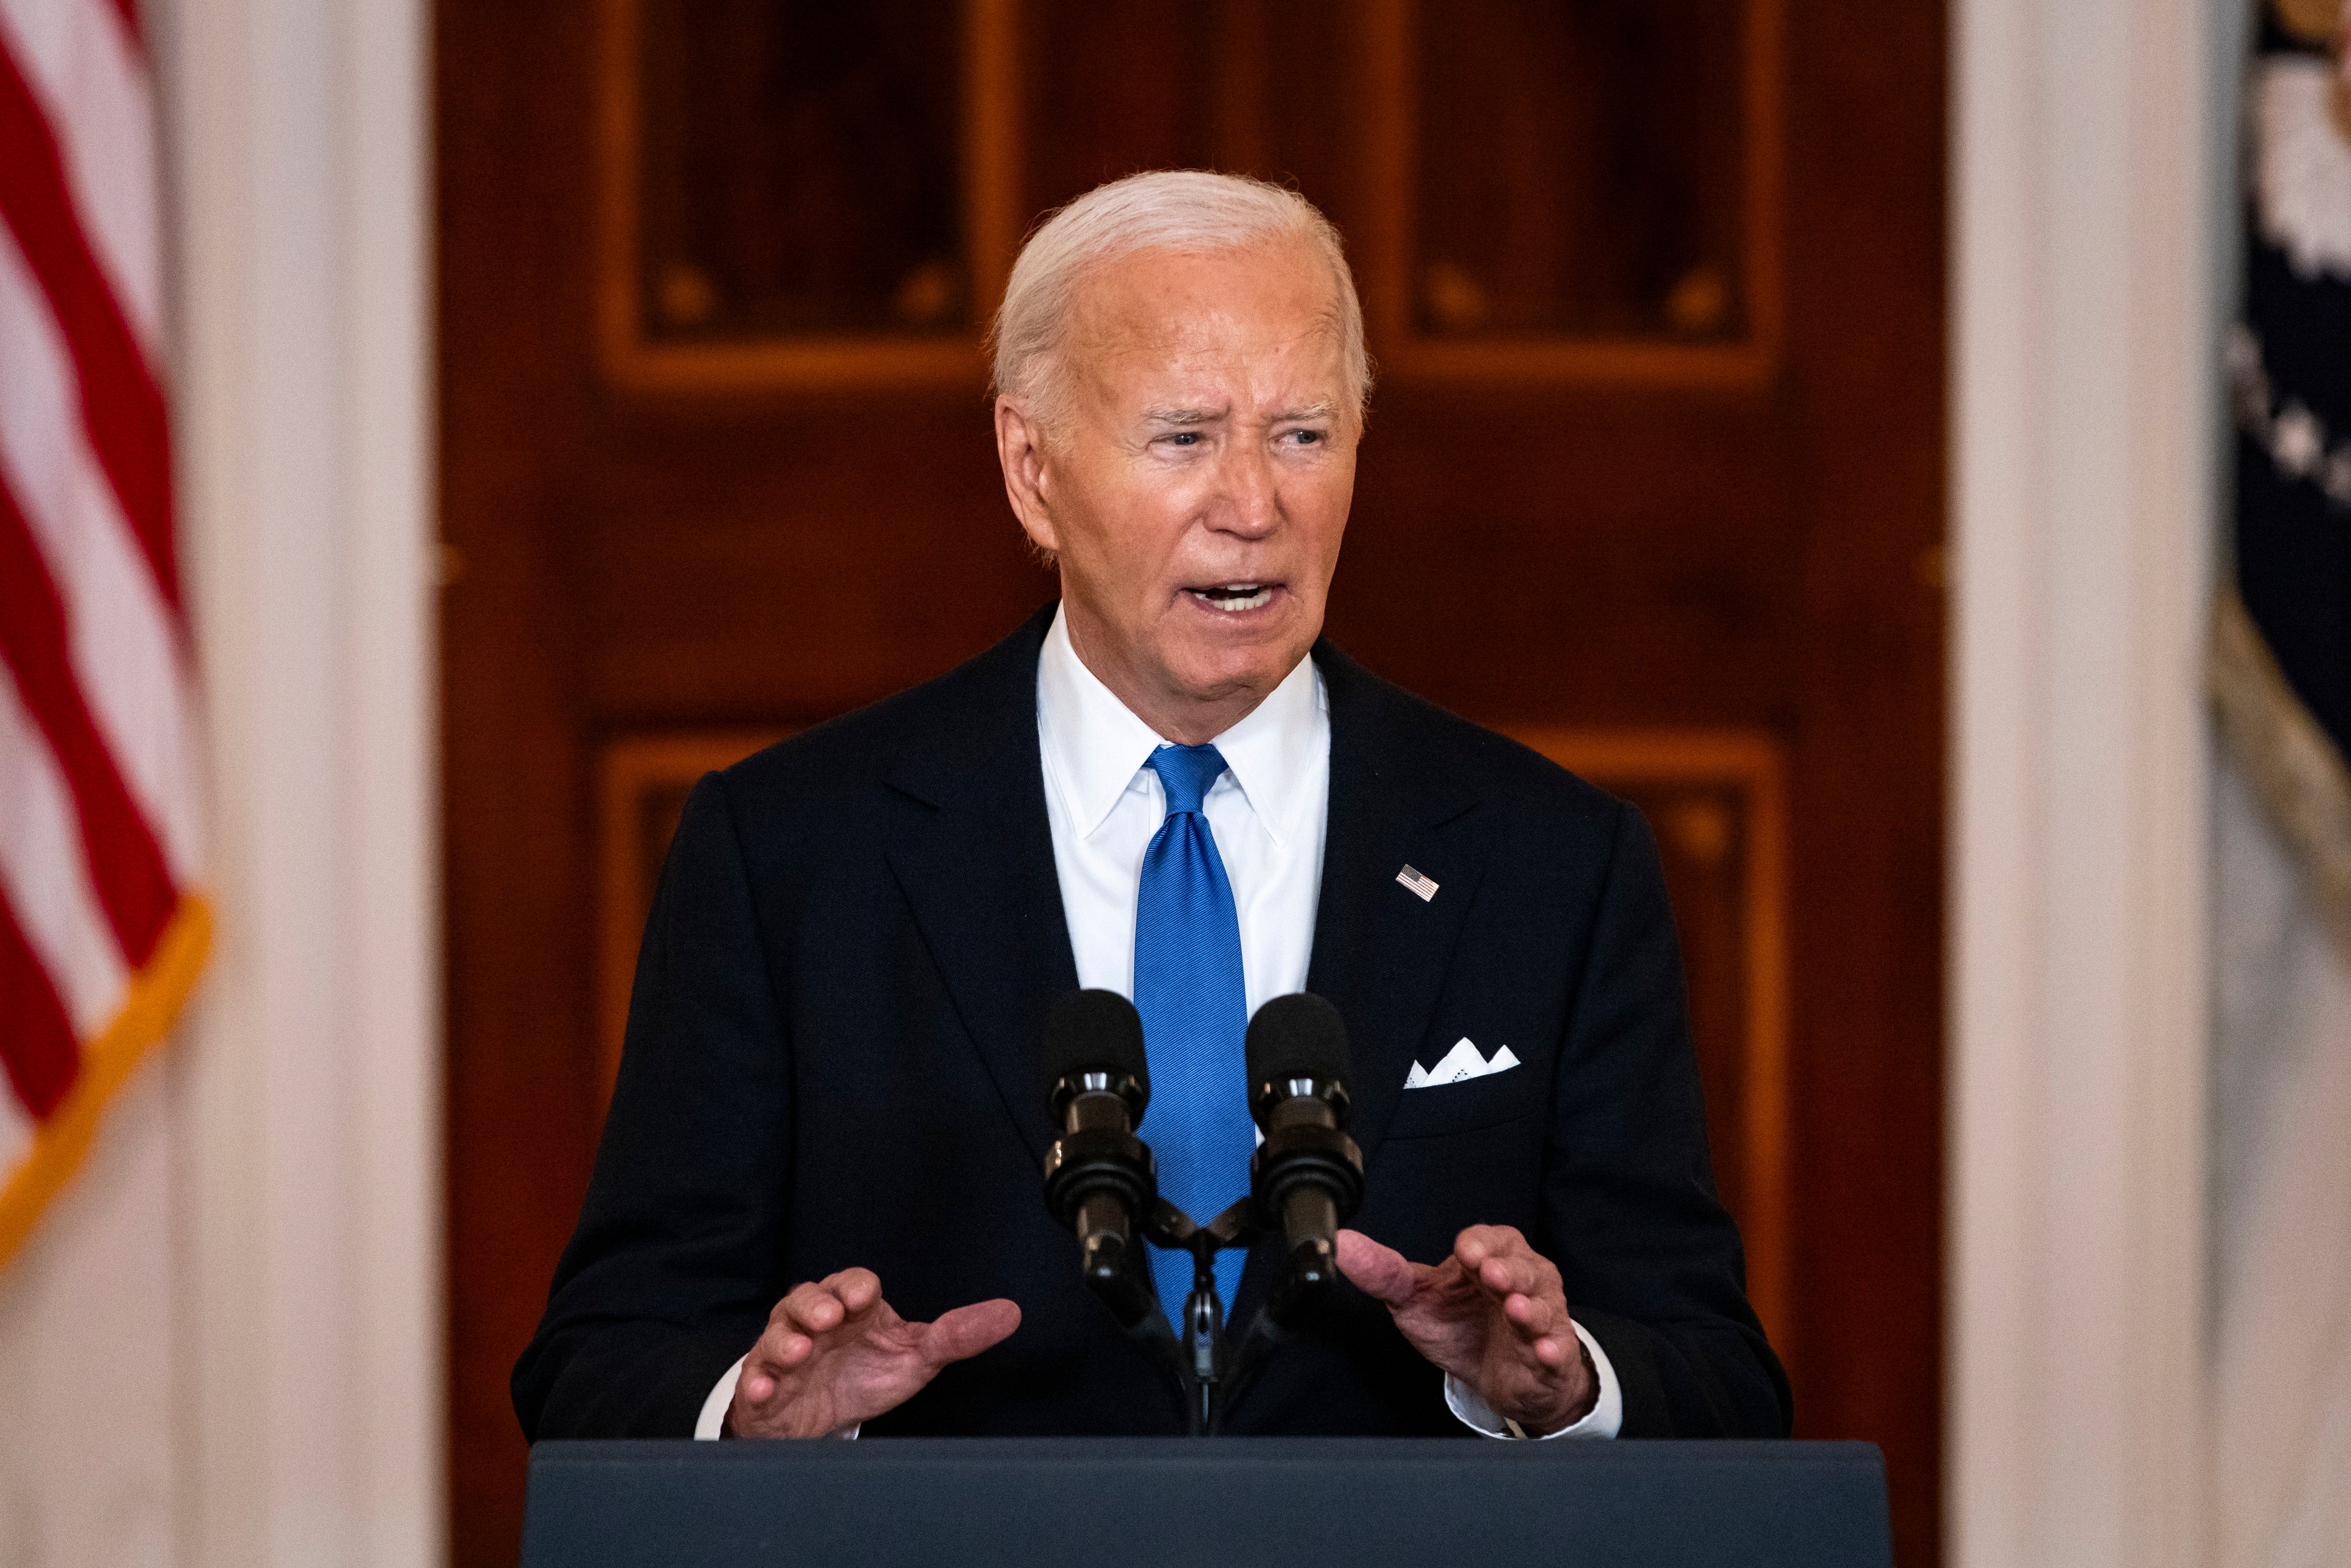 Reporter Carl Bernstein has said that there have been several instances where Biden appeared as he did at his dismal debate